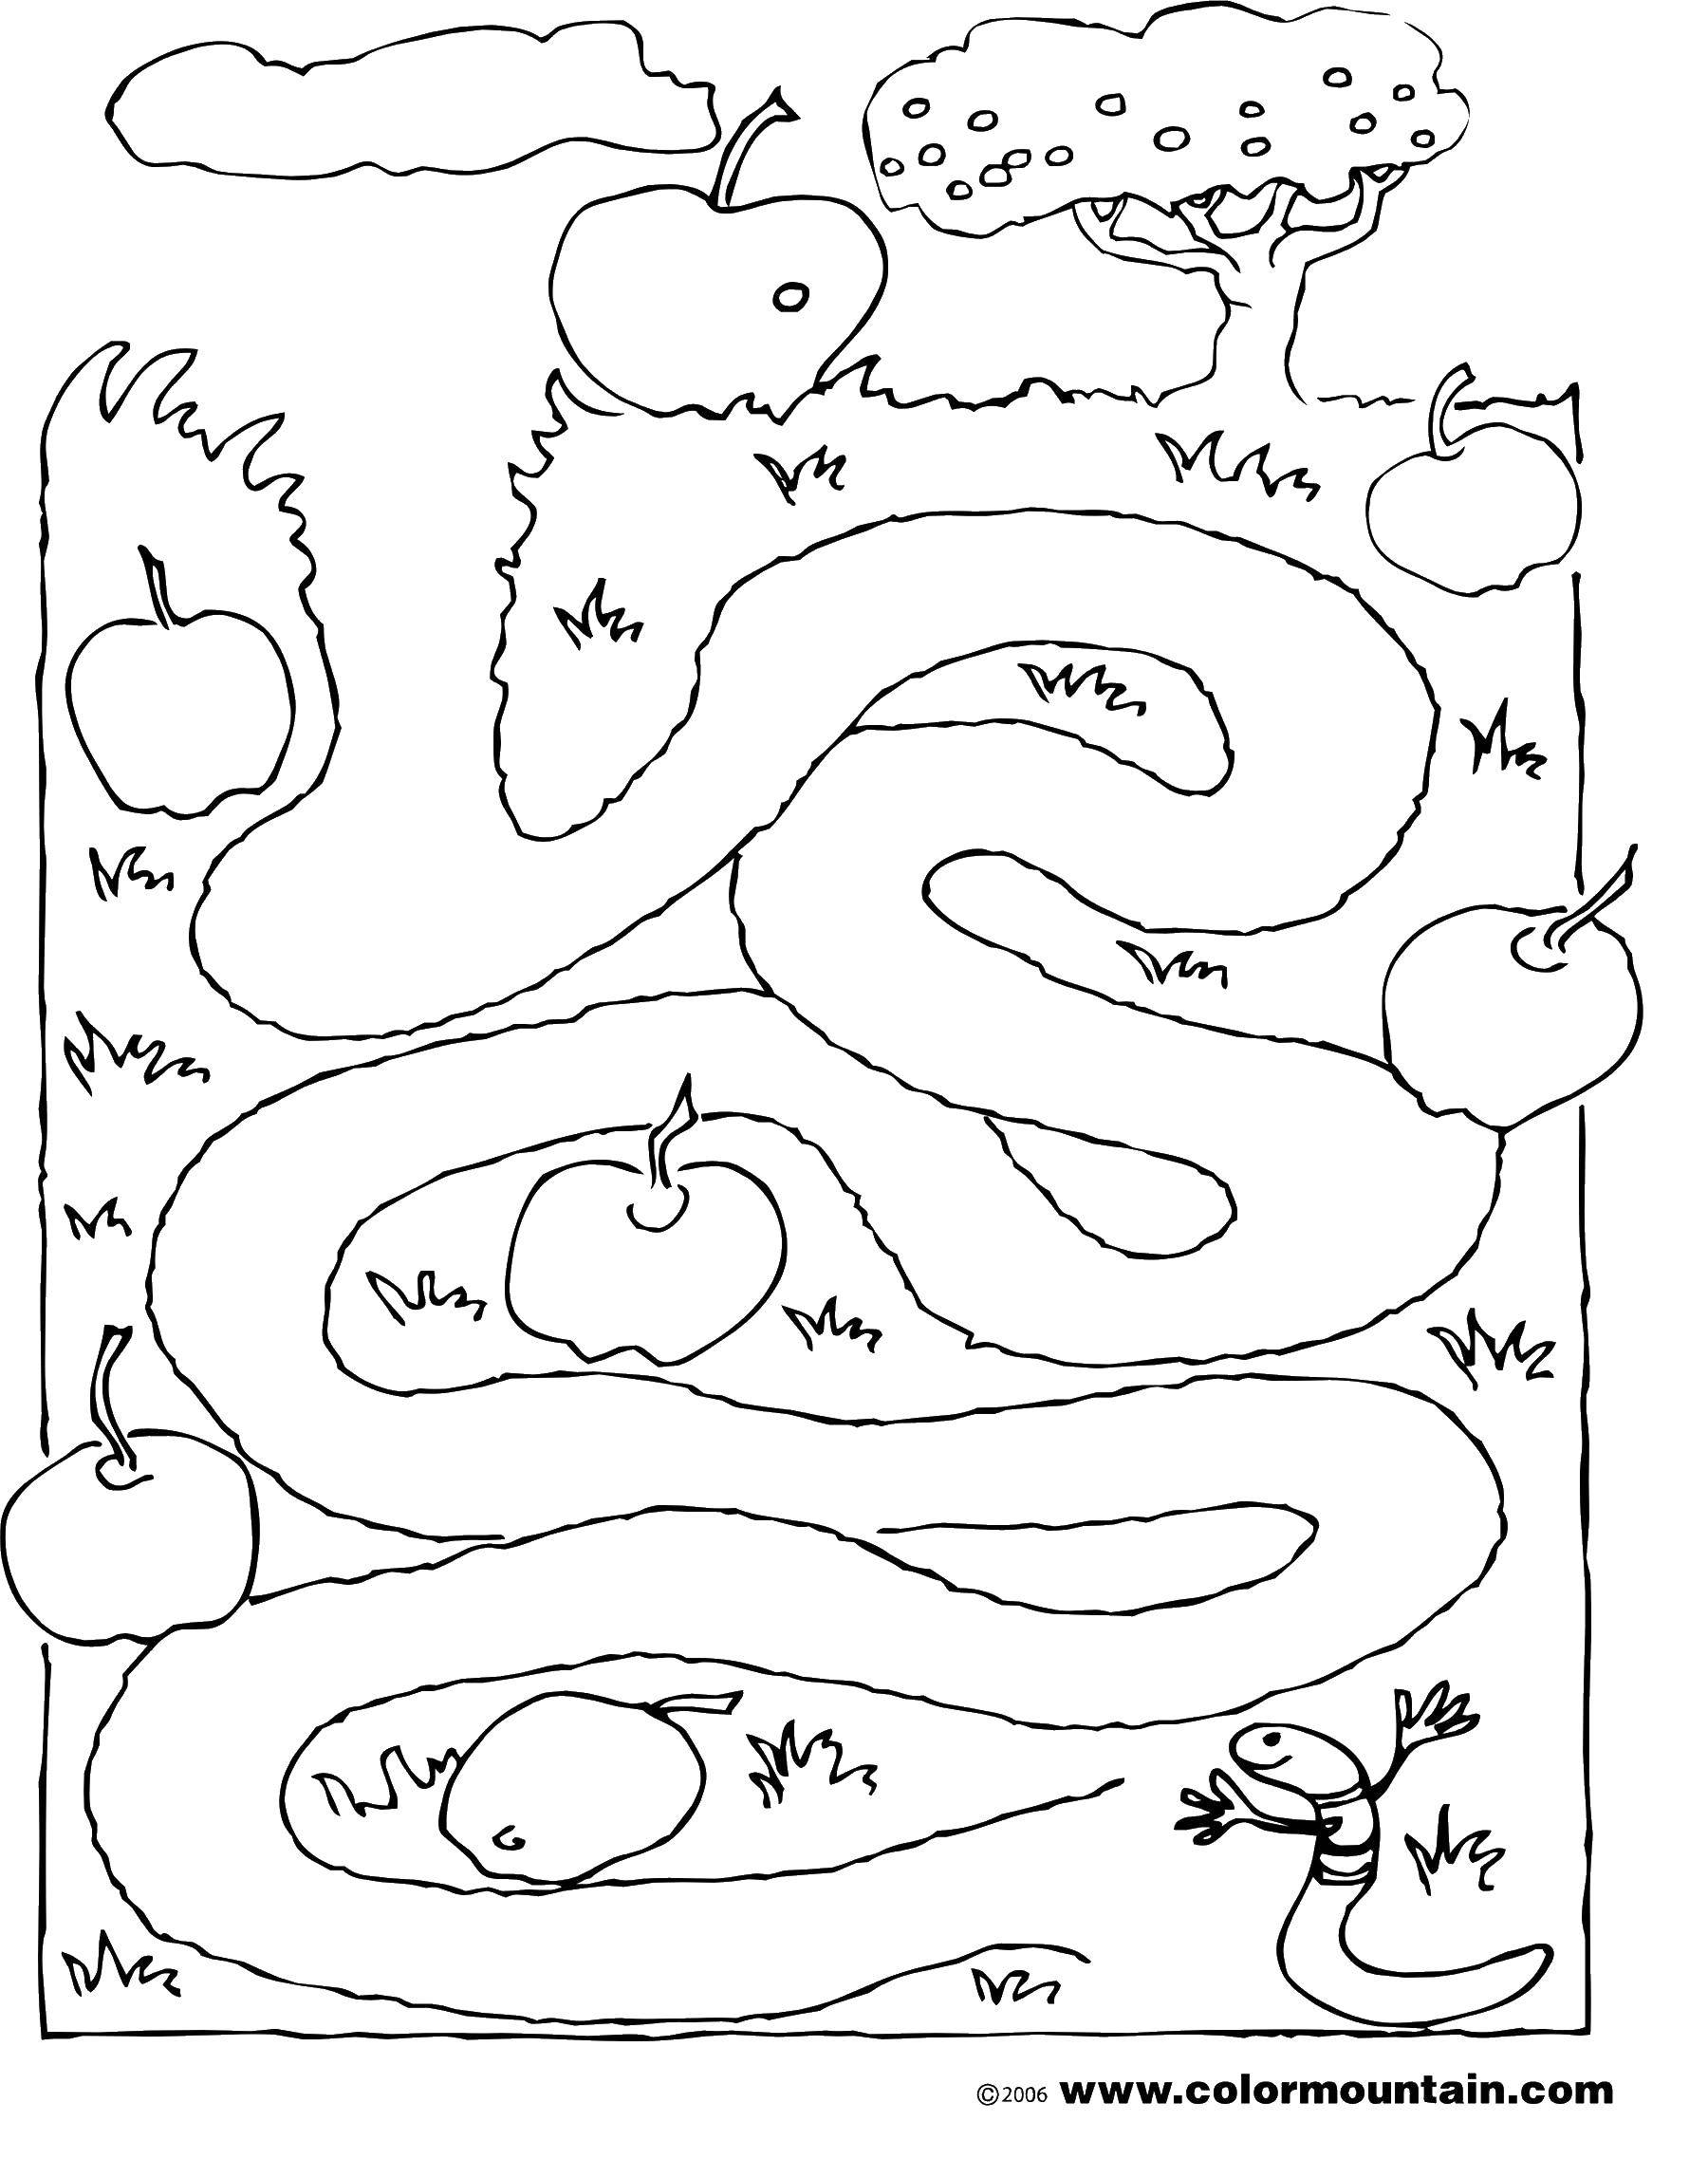 Coloring Help the worm. Category Mazes. Tags:  Maze, logic.